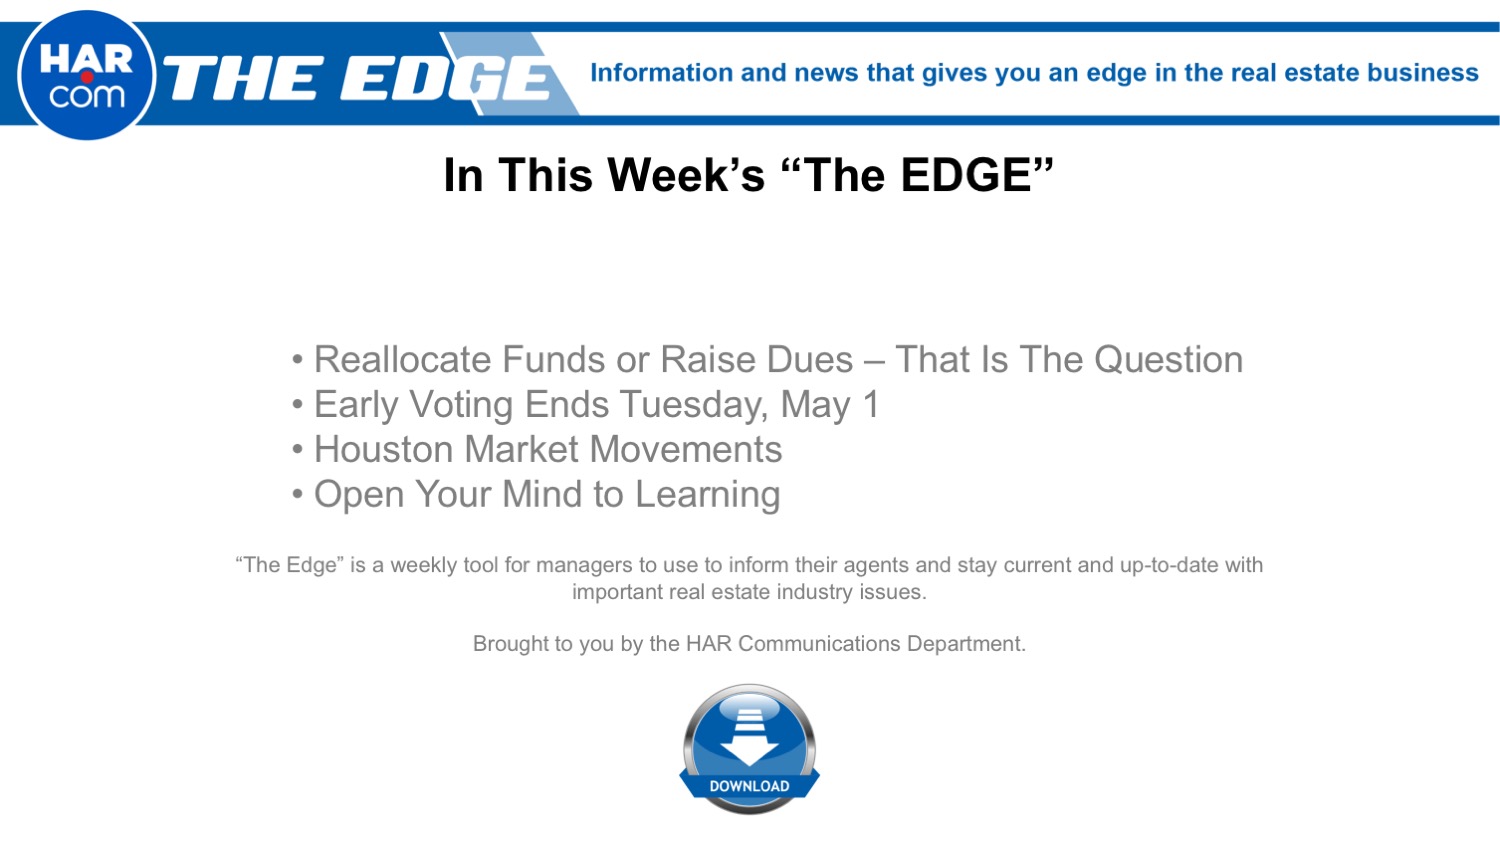 The EDGE: Week of April 30, 2018